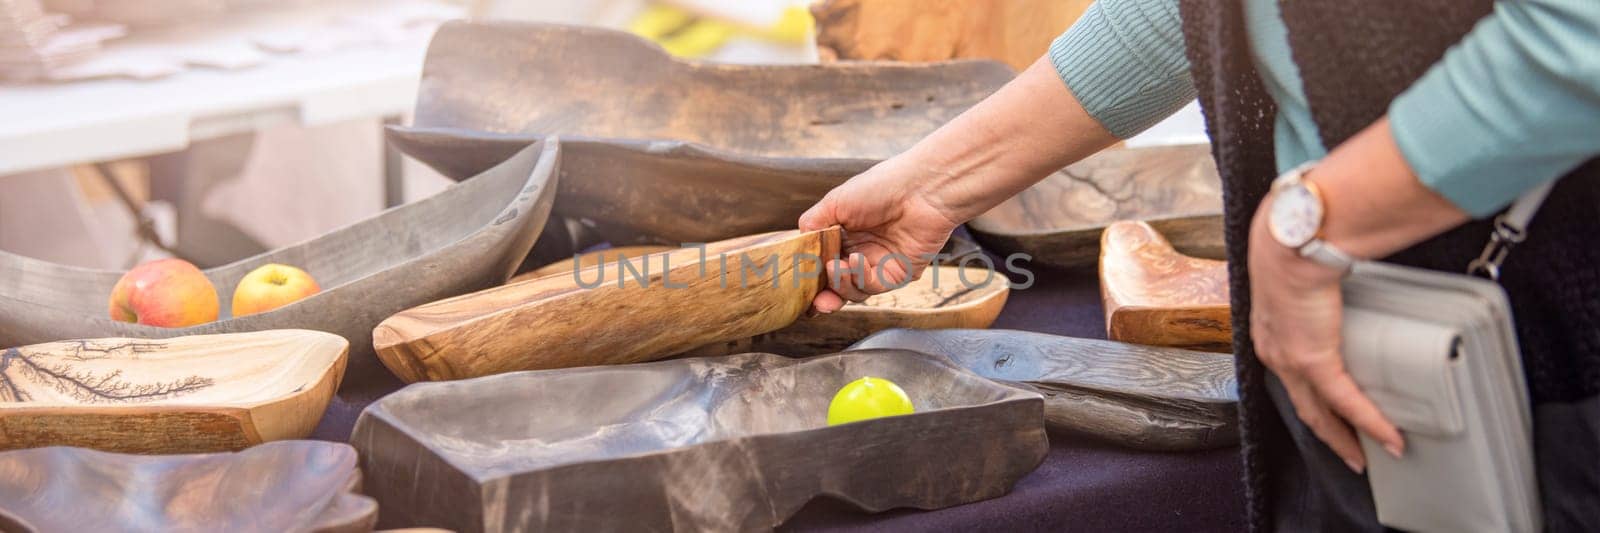 Wooden plate. Large plates and trays are made of exotic woods in different colors, the buyer chooses wooden utensils in the market, the concept of craft and small business by SERSOL